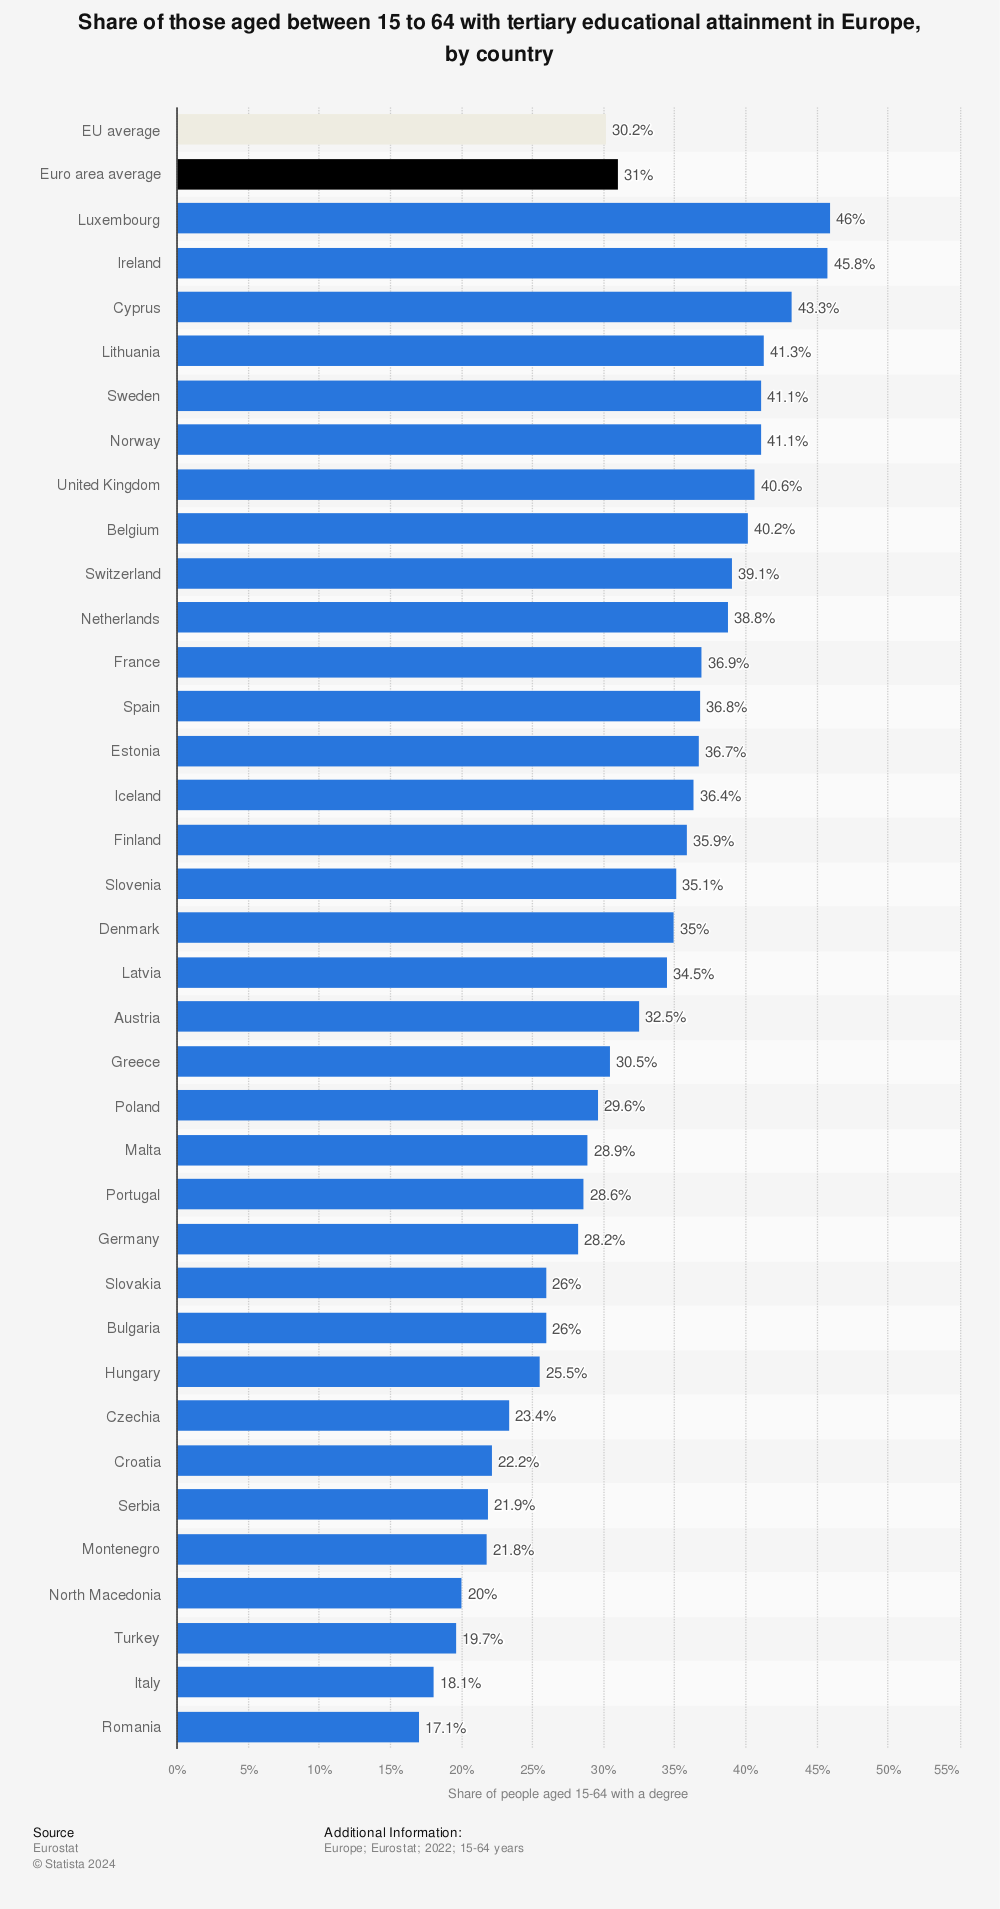 Statistic: Share of those aged between 15 to 64 with tertiary educational attainment in selected European countries in 2020 | Statista